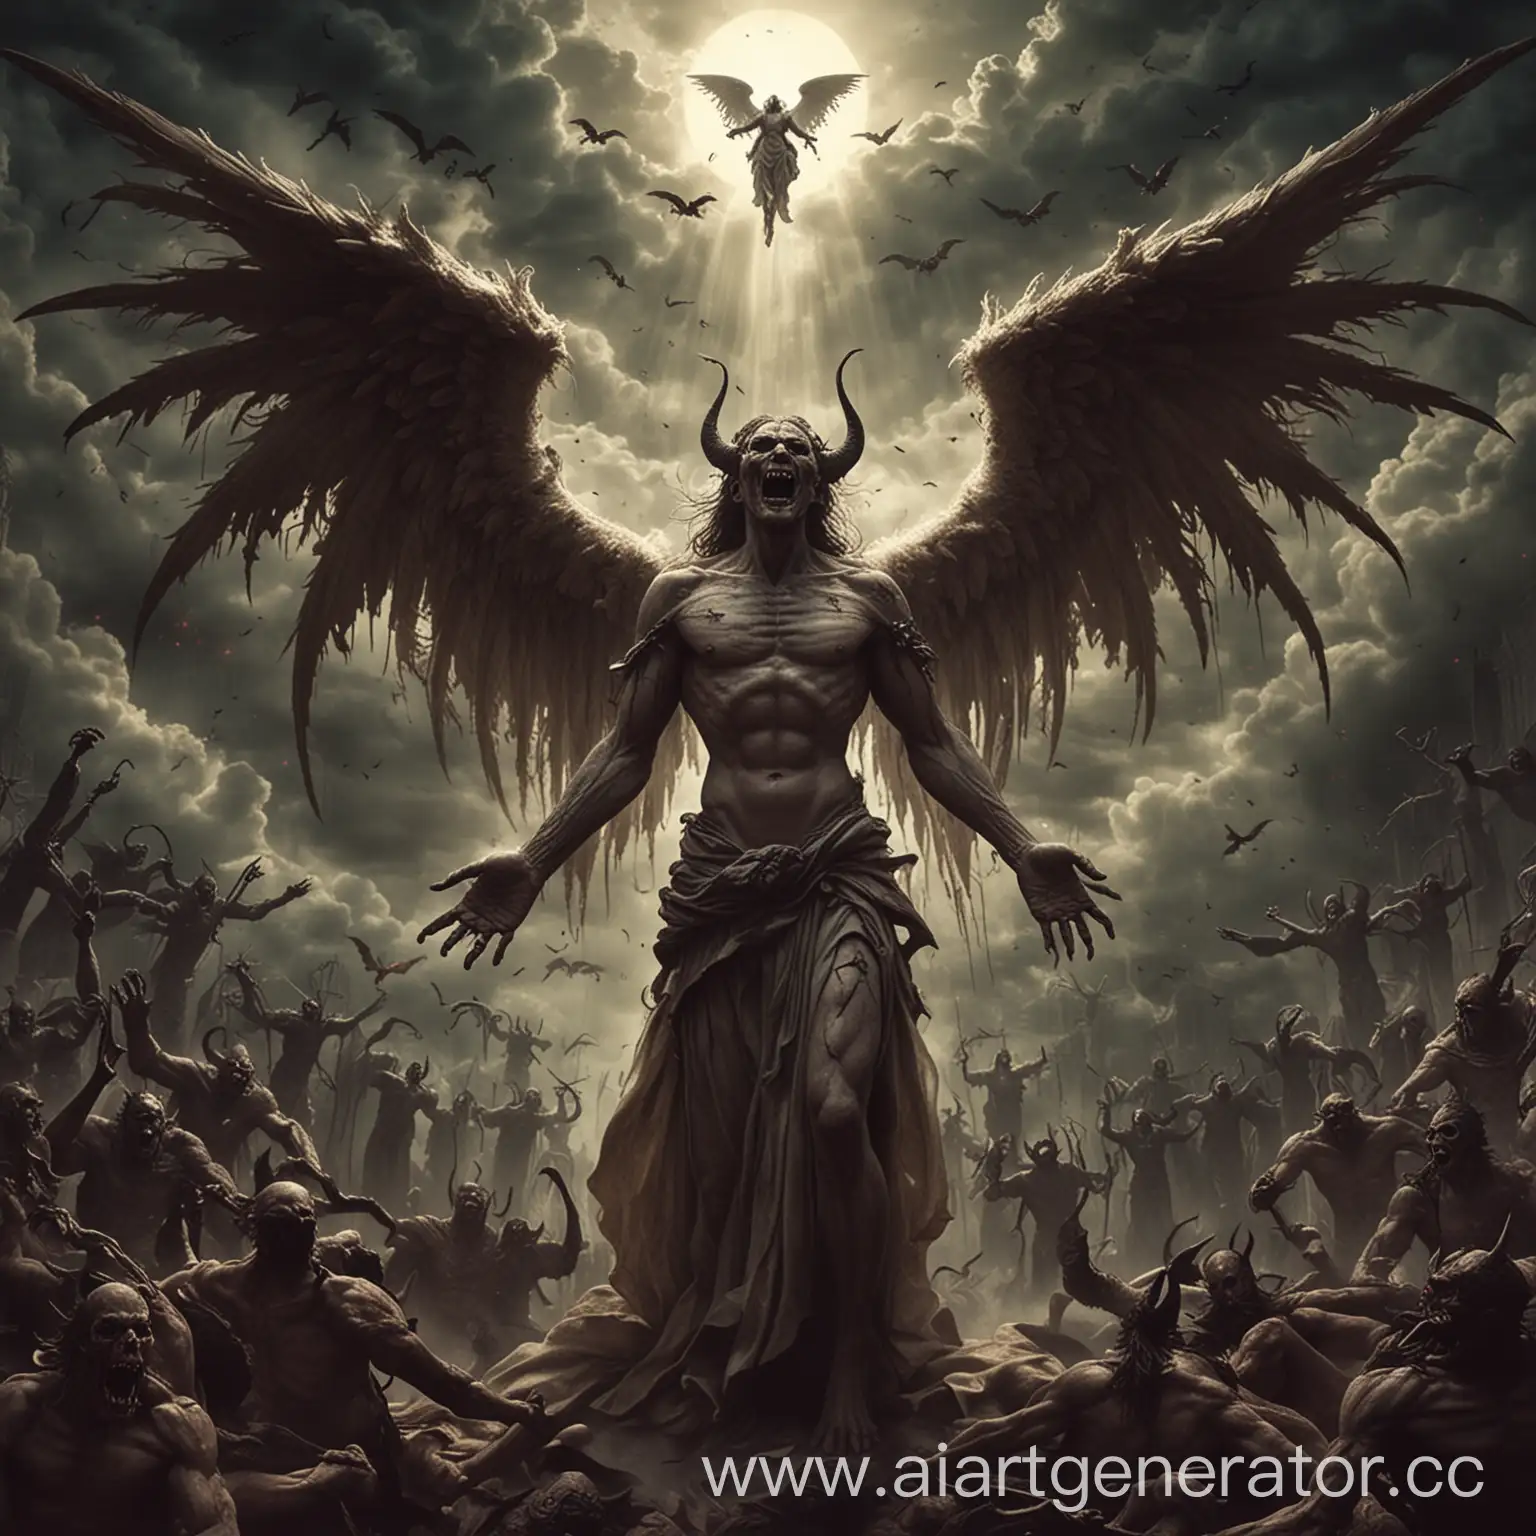 Dark-Angels-and-Falling-Demons-in-Heavens-Abyss